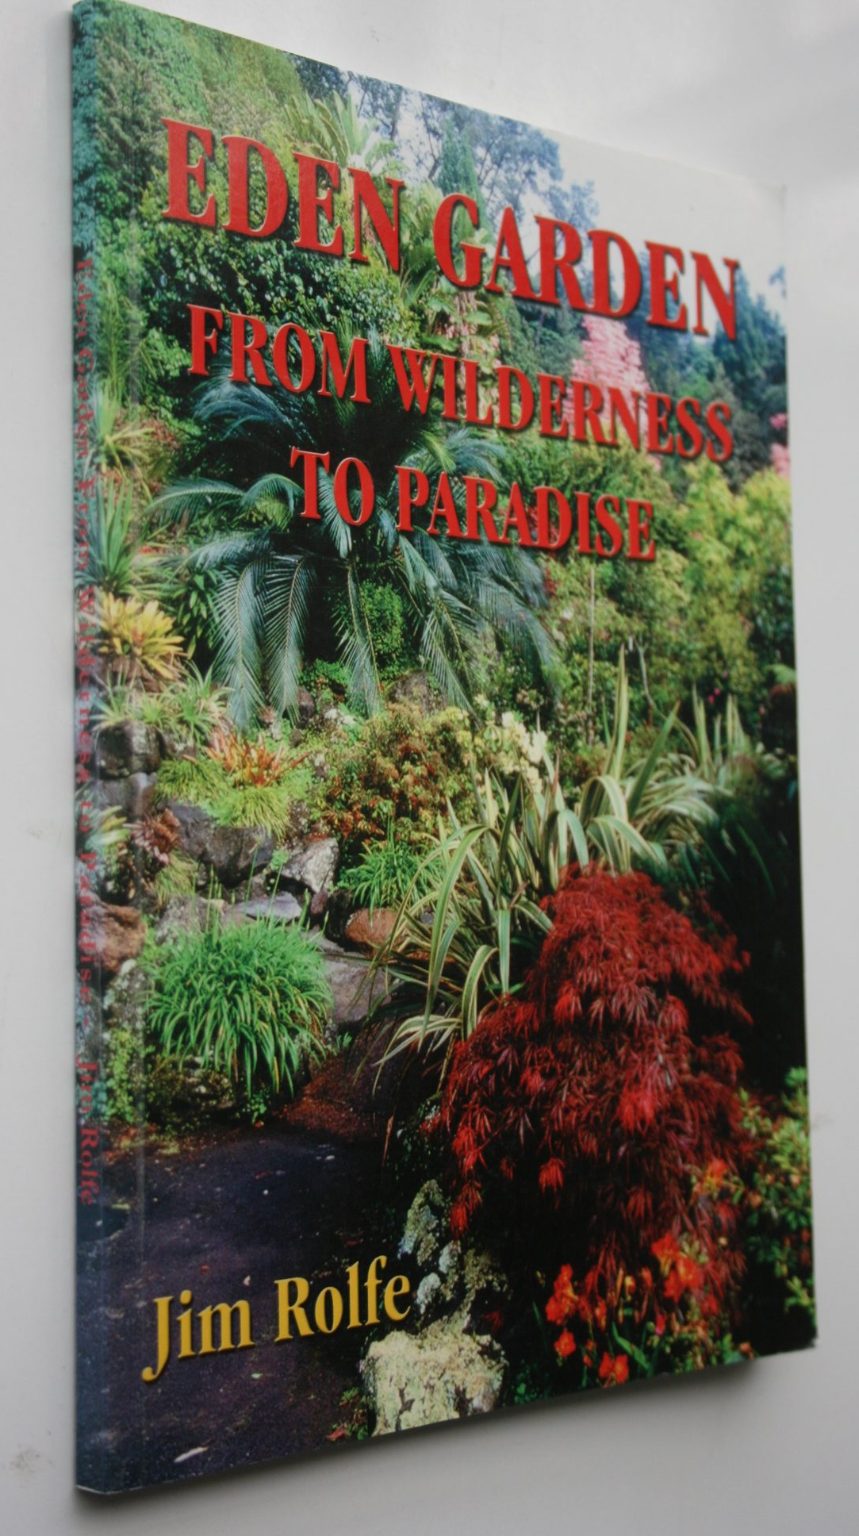 Eden Garden from Wilderness to Paradise. SIGNED By Jim Rolfe